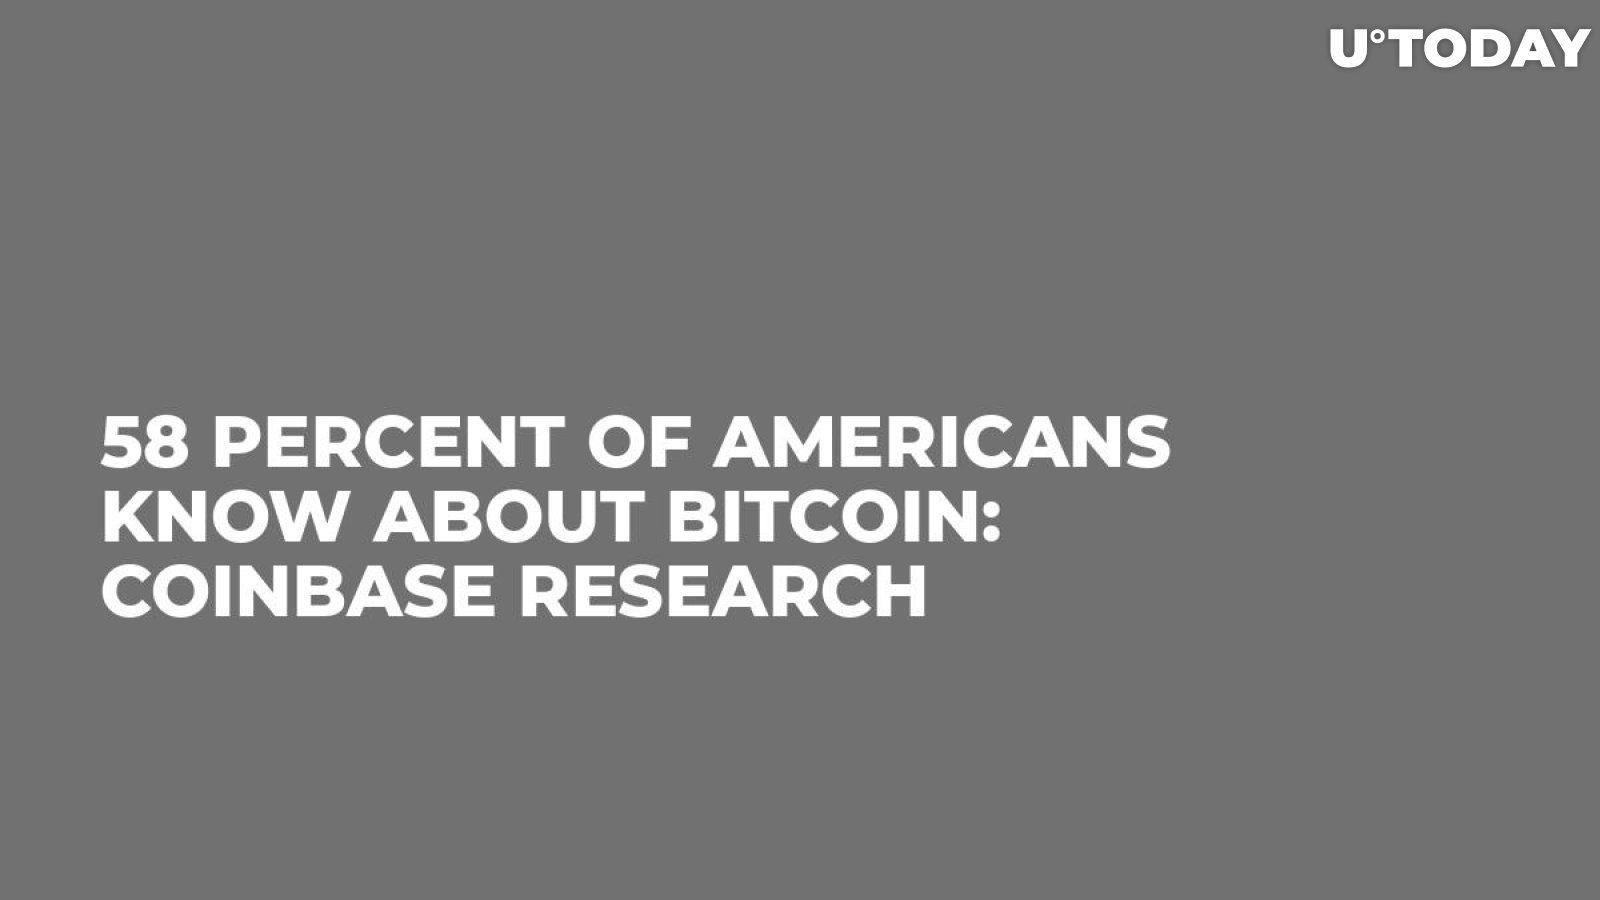 58 Percent of Americans Know About Bitcoin: Coinbase Research